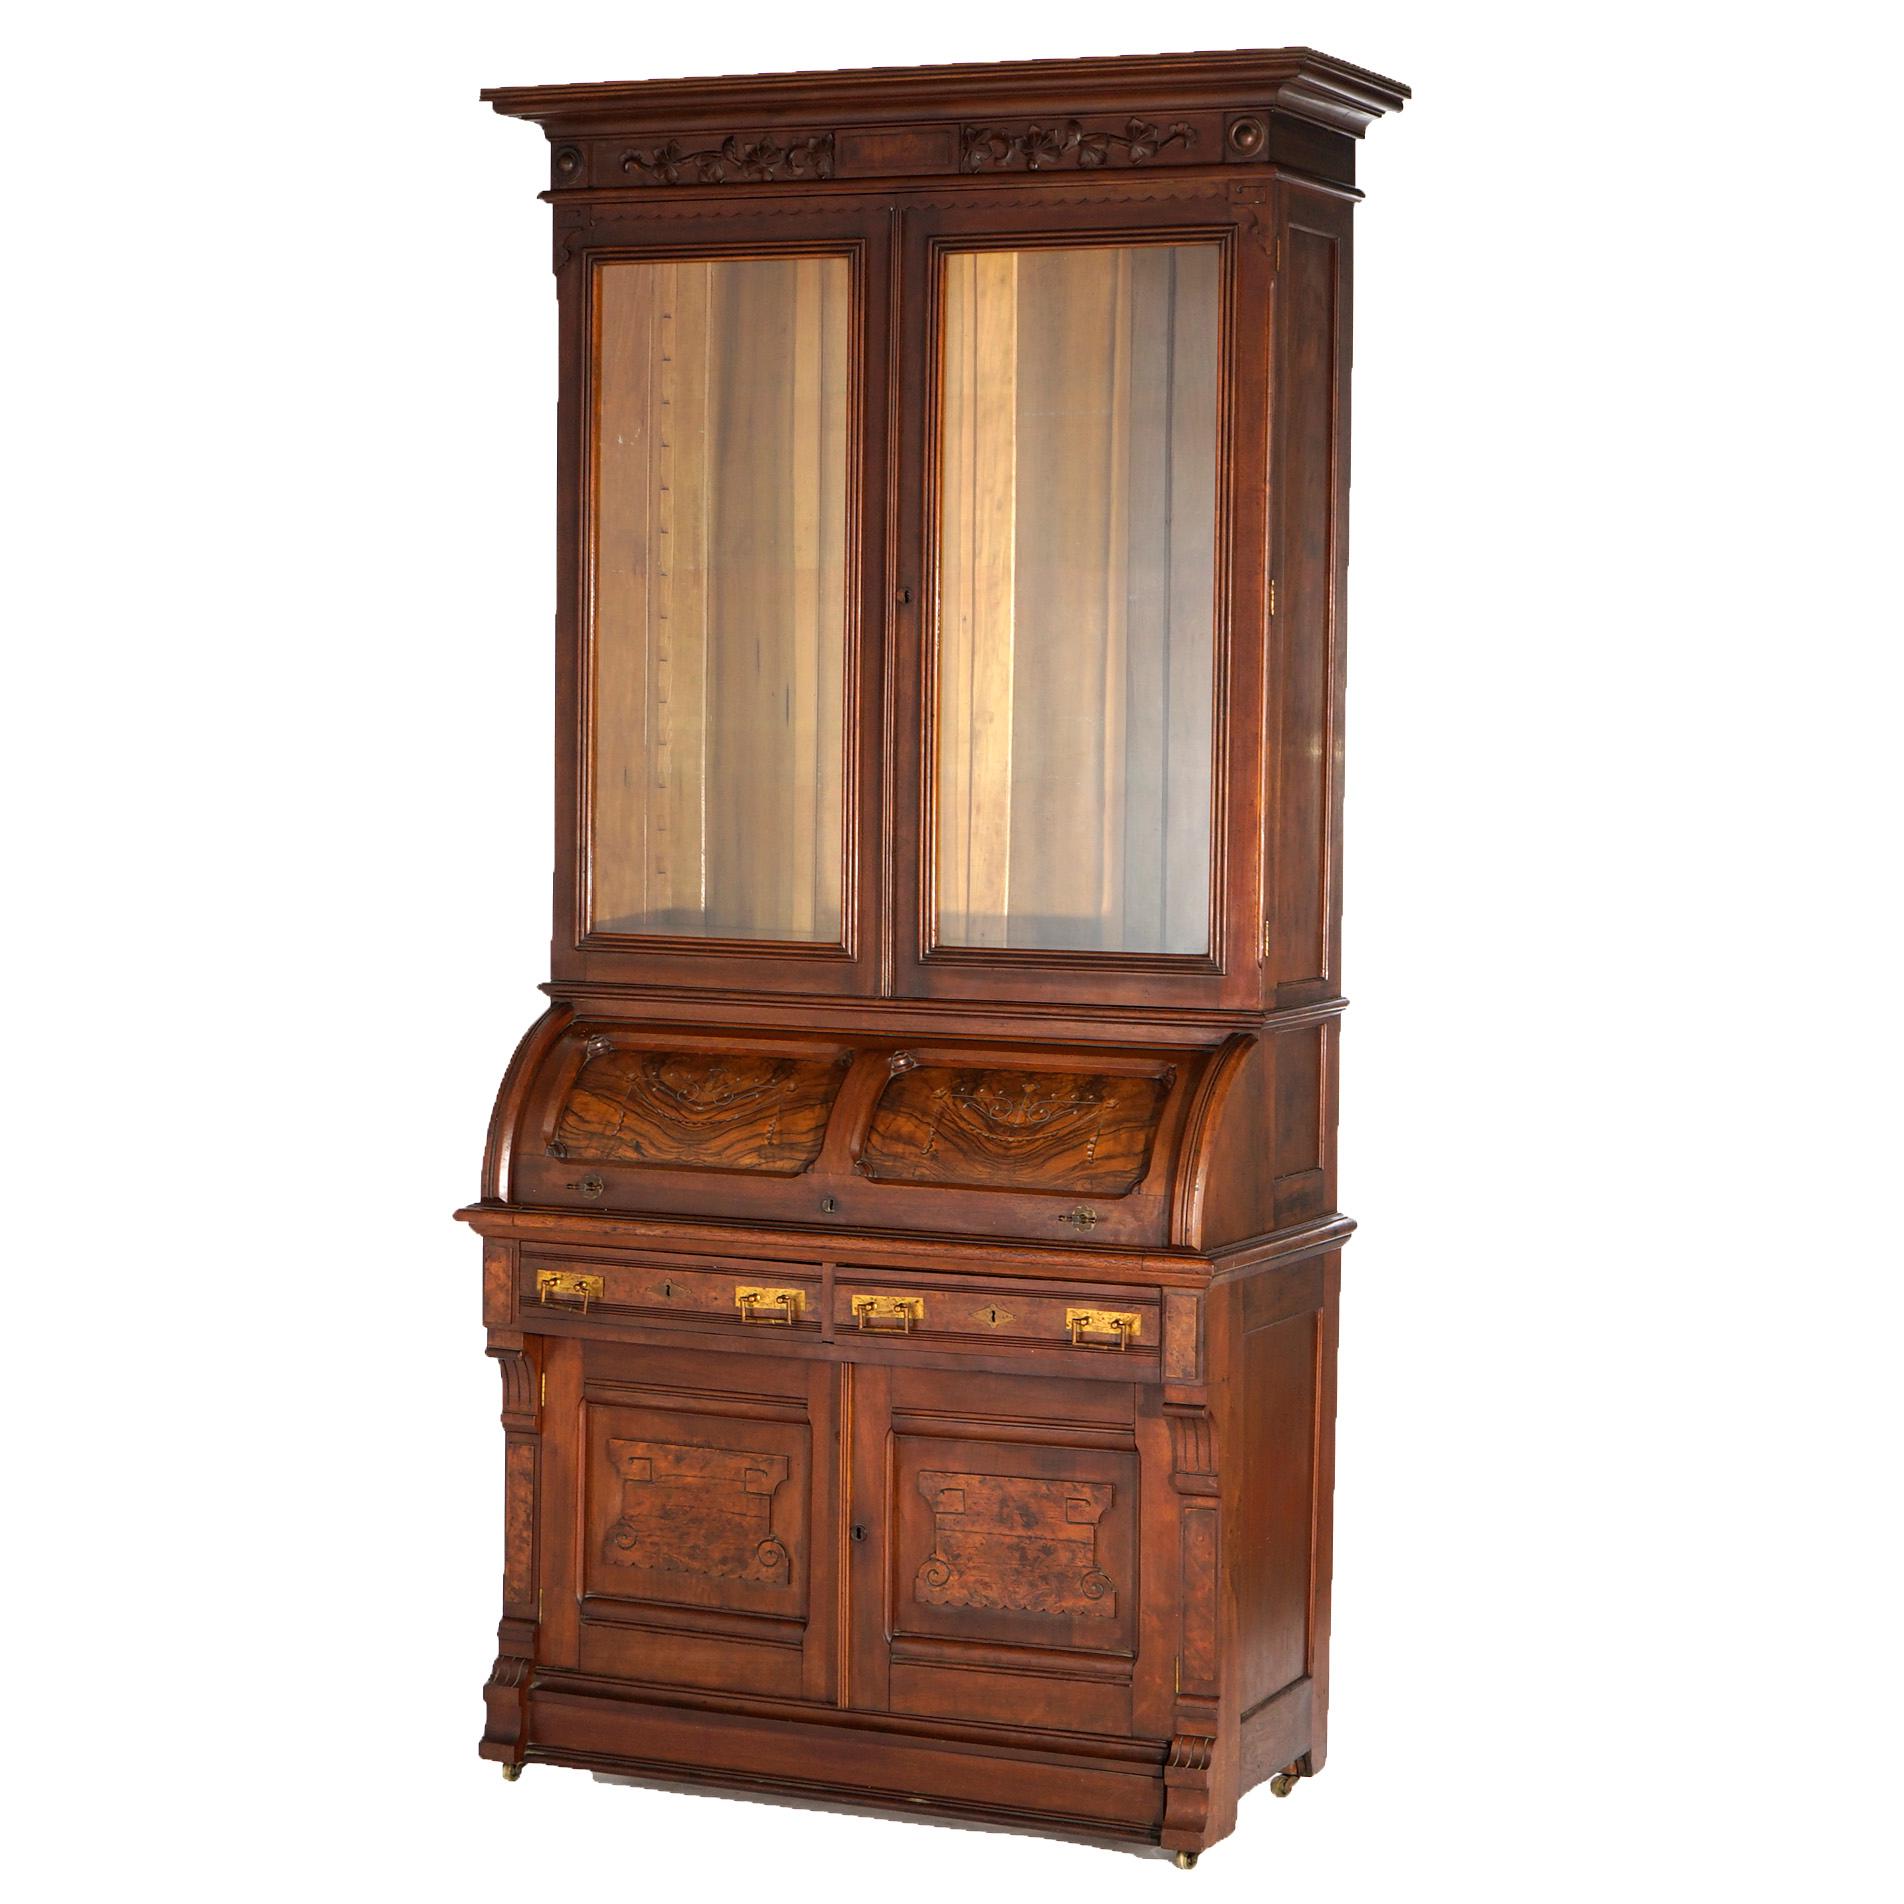 An antique Eastlake cylinder desk offers paneled walnut and burl construction with upper double glass door bookcase over barrel roll desk opening to writing surface and storage compartments, lower having double drawers over double door cabinet,